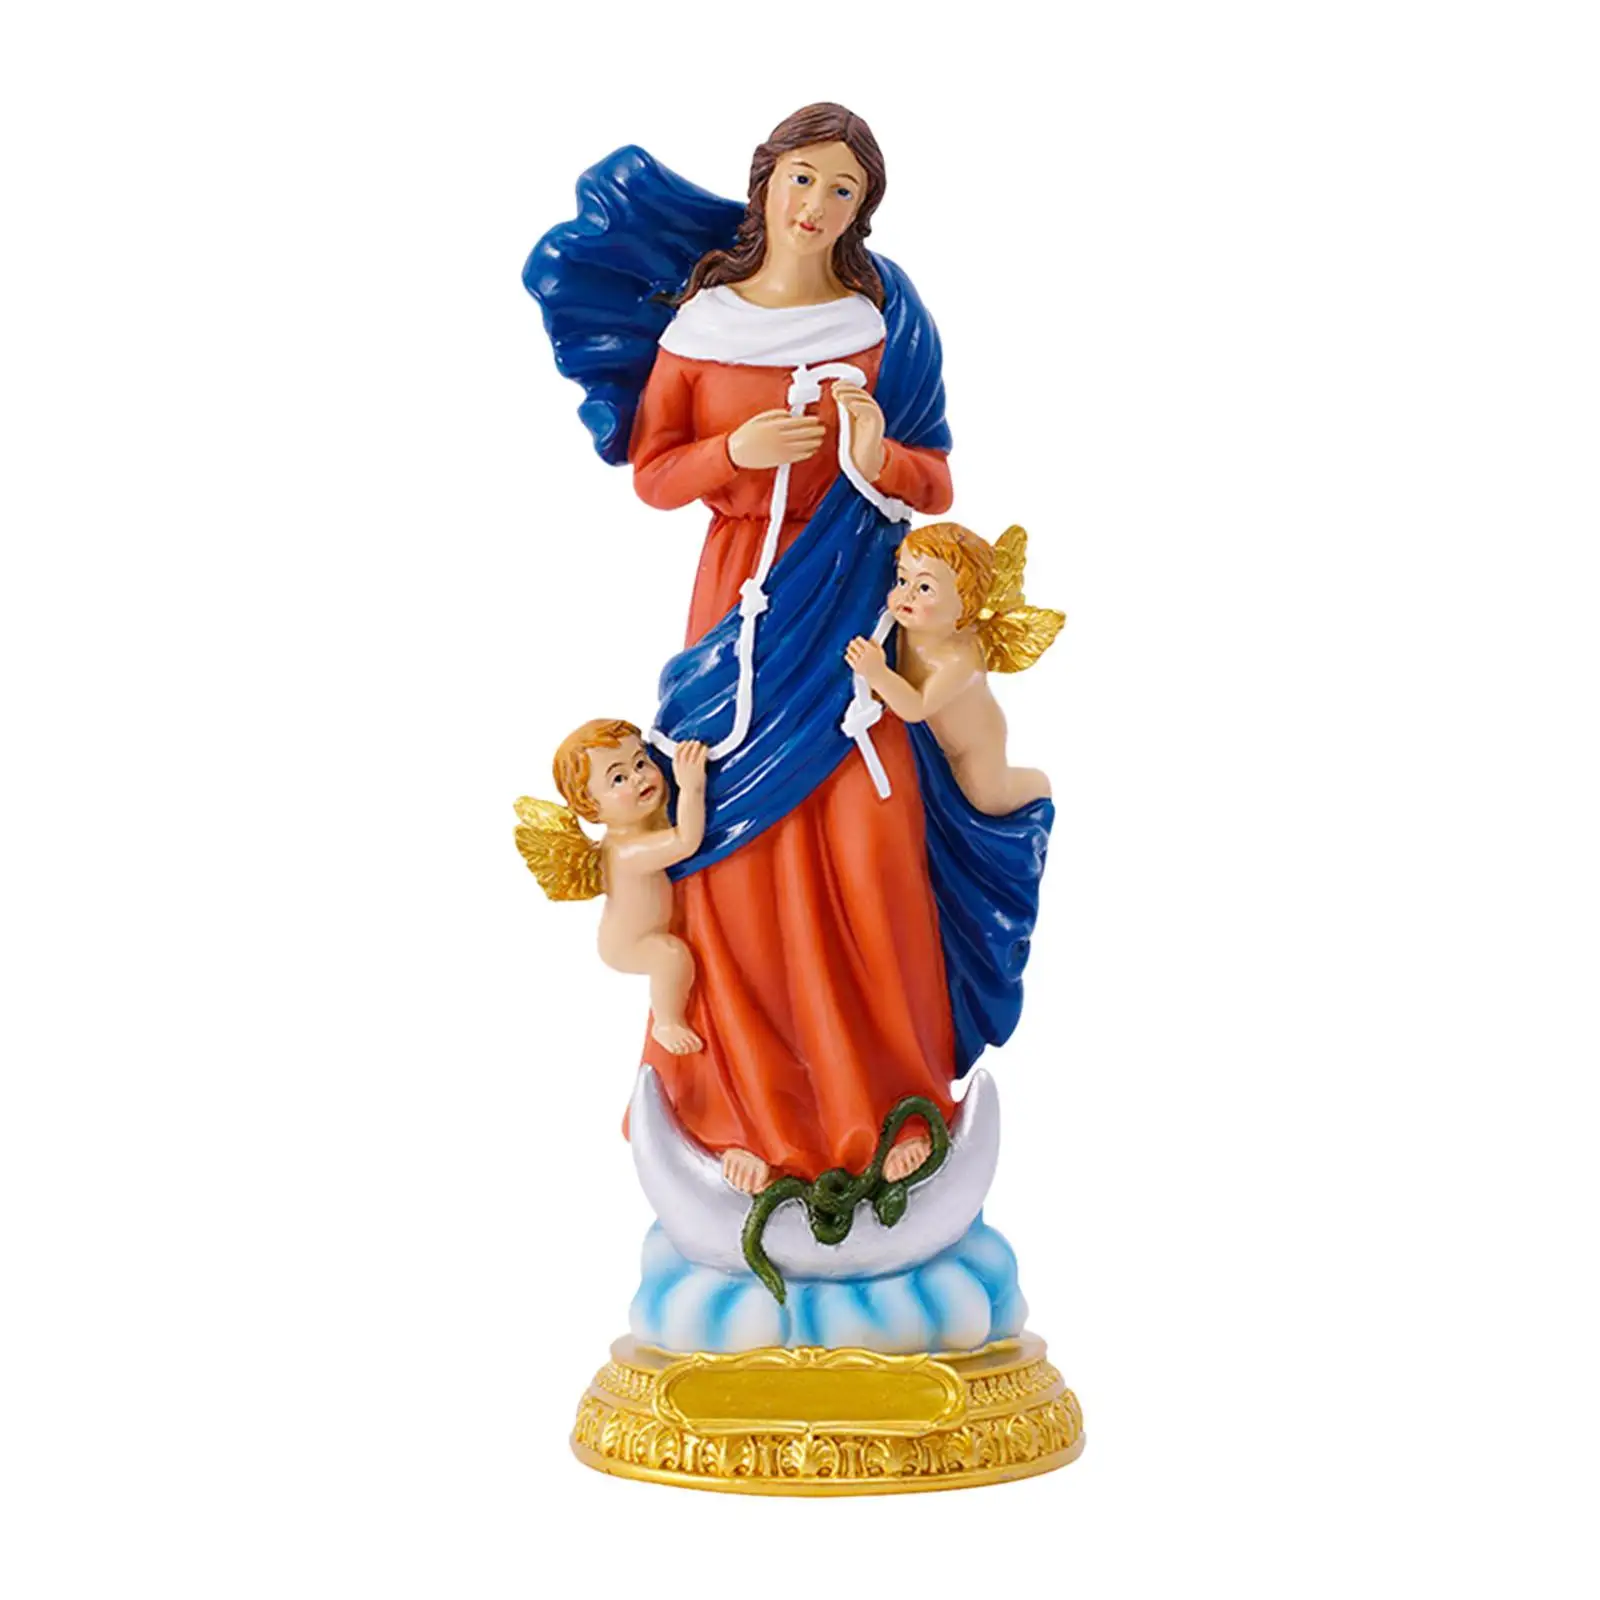 Virgin Mother Mary Statue Resin Figurines Nativity Decoration Angel Sculpture Religious for Holy Family Cabinet New Year Home